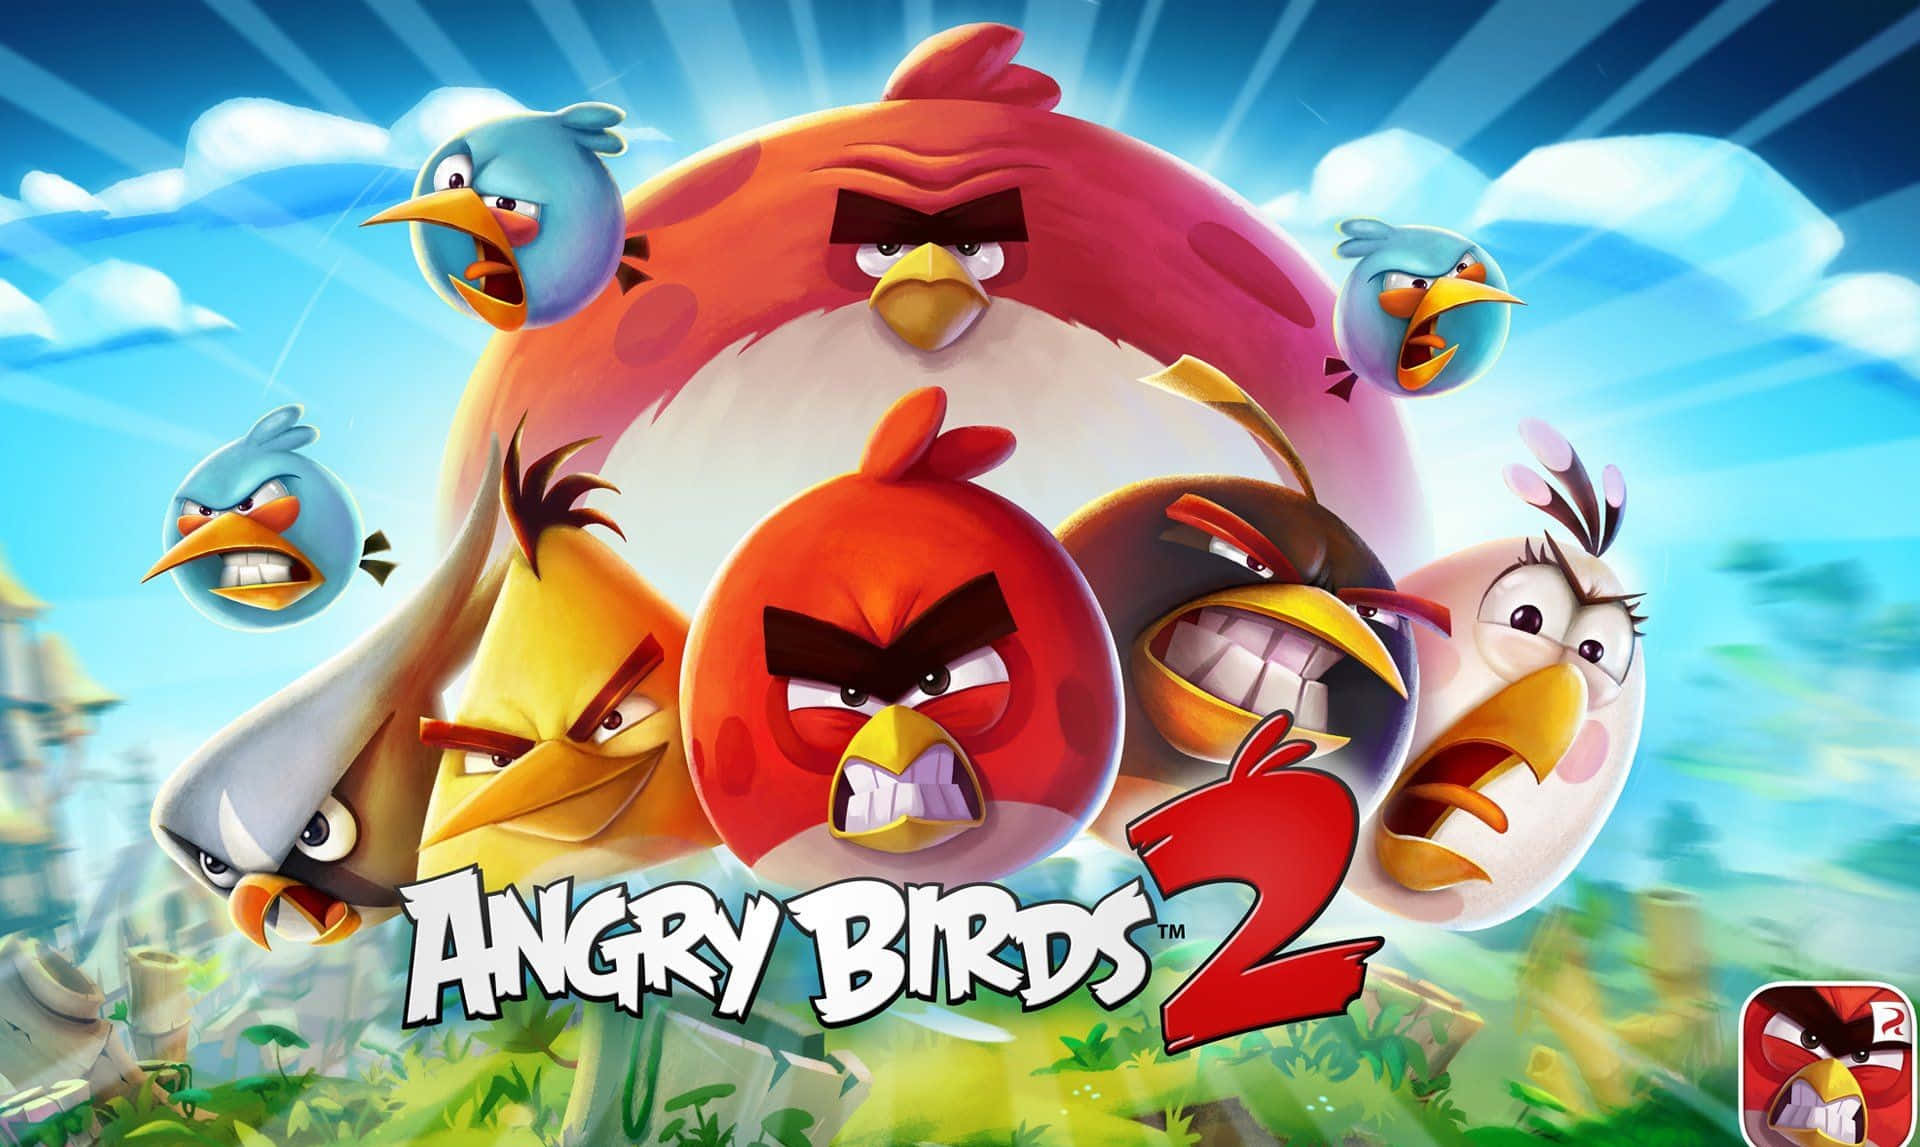 Join The Angry Birds On An Exciting Adventure